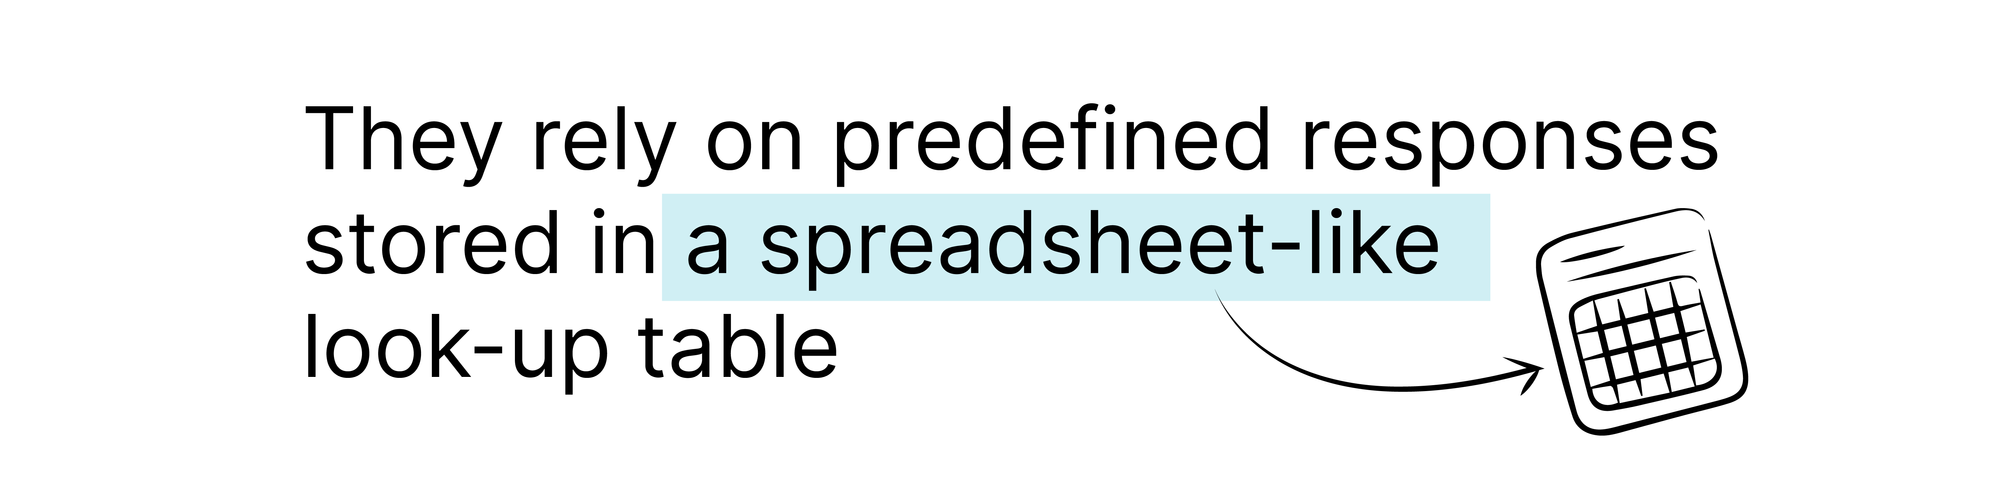 They rely on pre-defined responses stored in a Look-up table